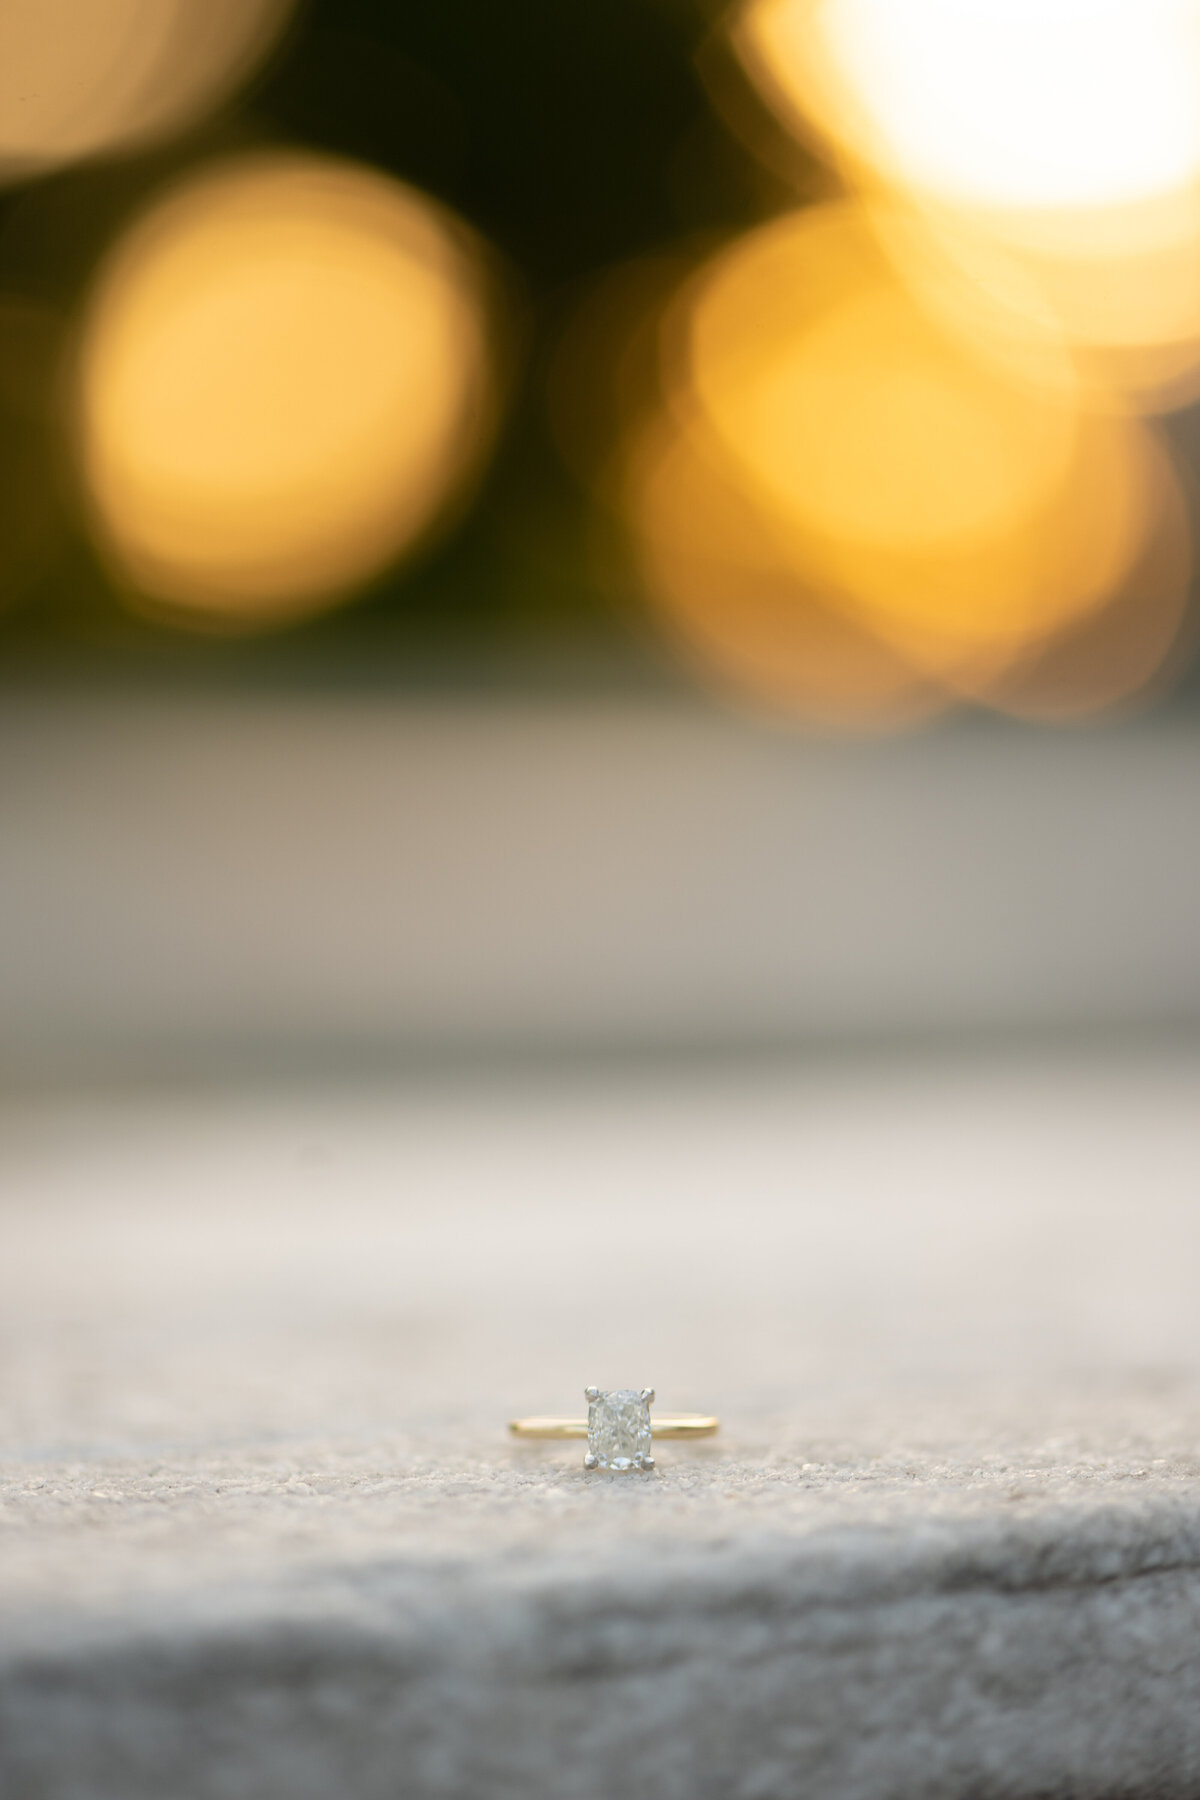 Bride's wedding ring sits on stone and marble ledge at golden hour/sunset of a wedding/engagement session at the Cleveland Museum of History in Cleveland Ohio. Photo taken by Aaron Aldhizer